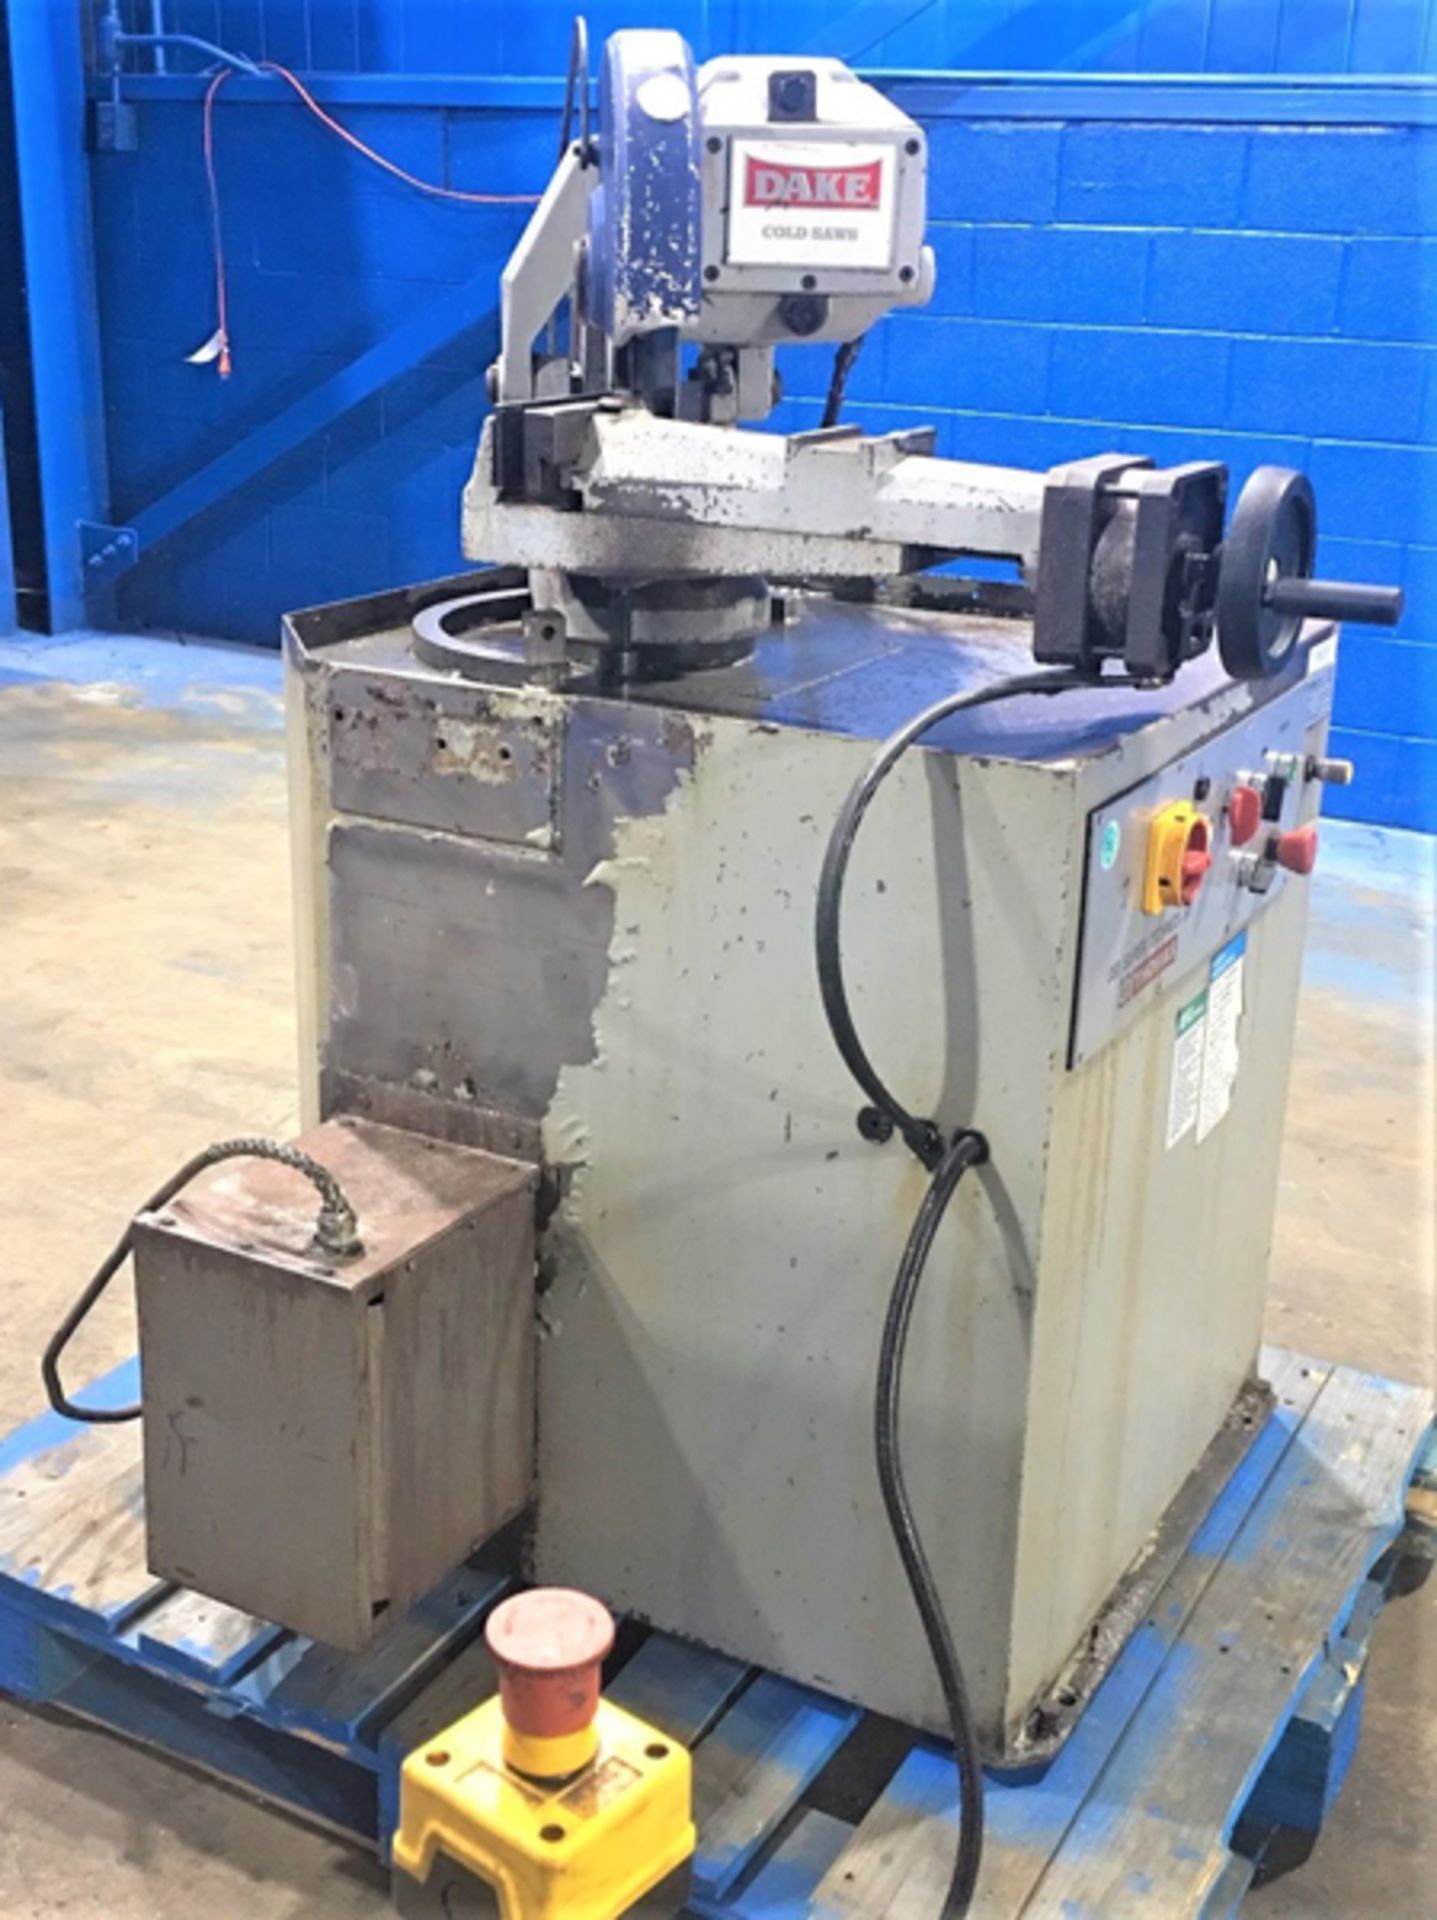 2003 Thomas Dake Semi-Automatic Cold Saw | 14", Mdl: 350ST/SA, S/N: 03-02217, Located In: - Image 8 of 17